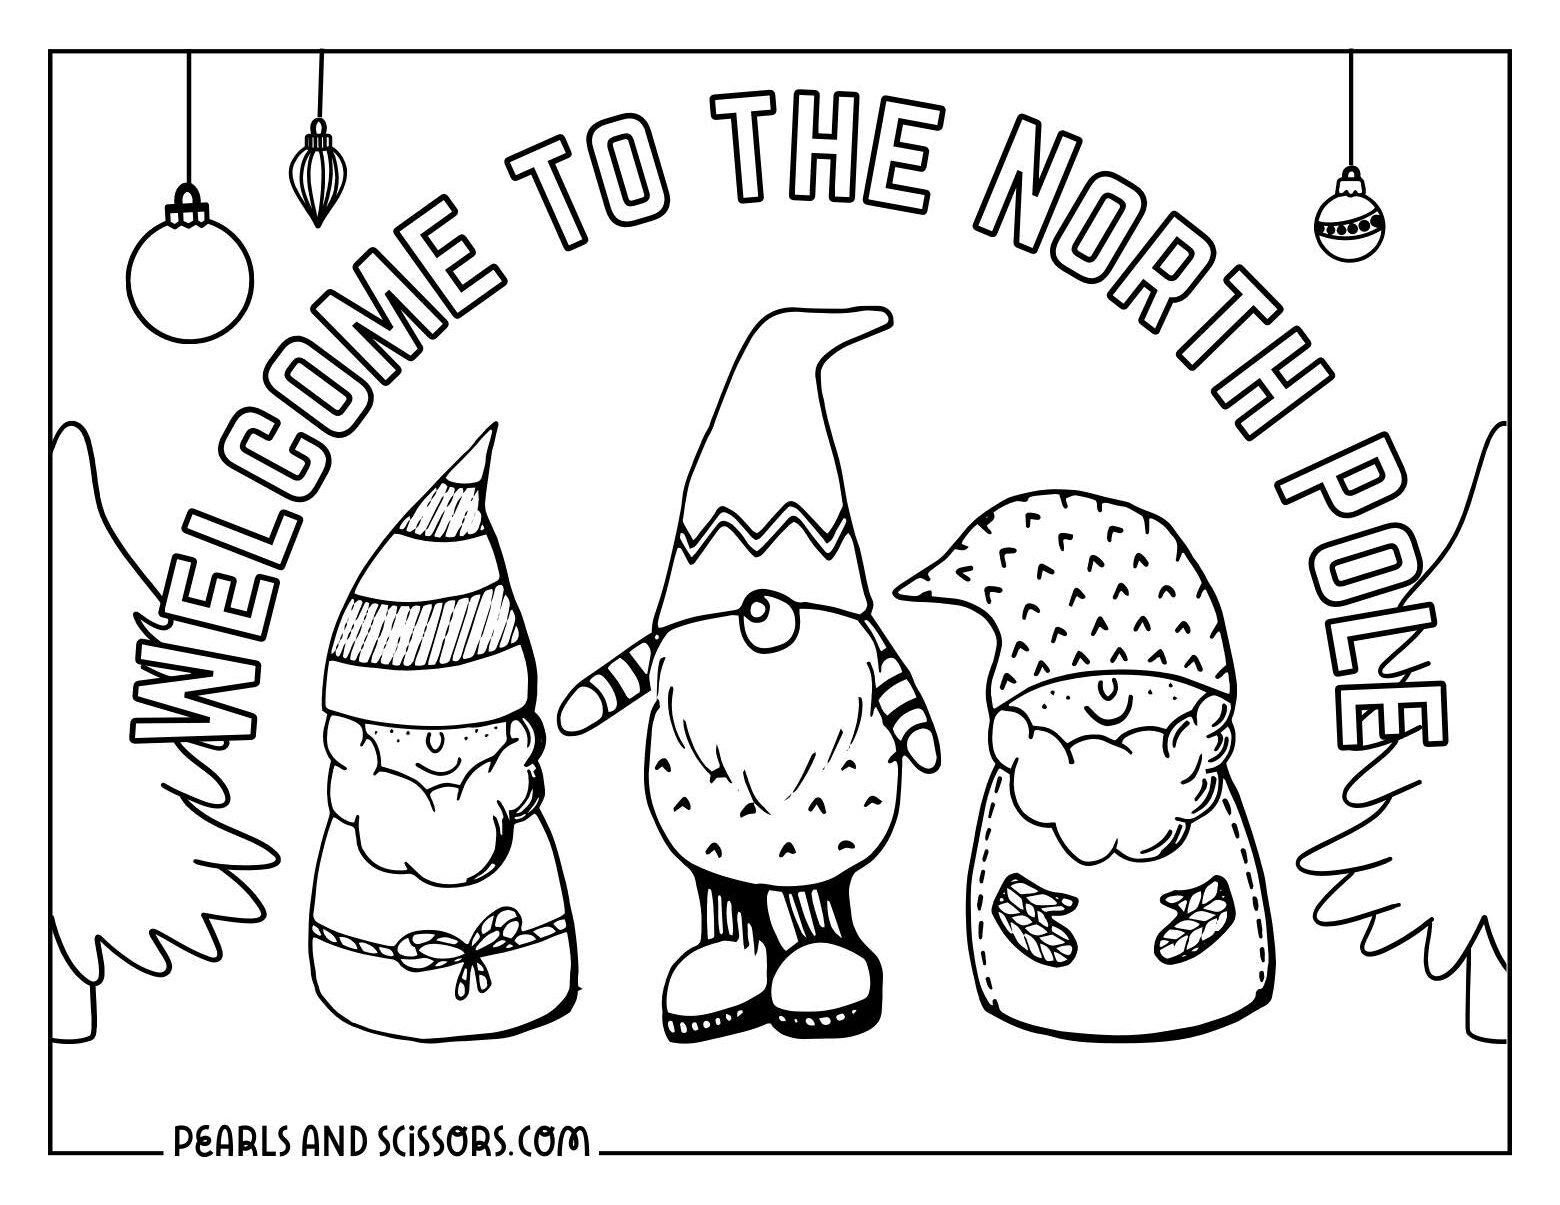 Gnomes from North Pole coloring sheet.